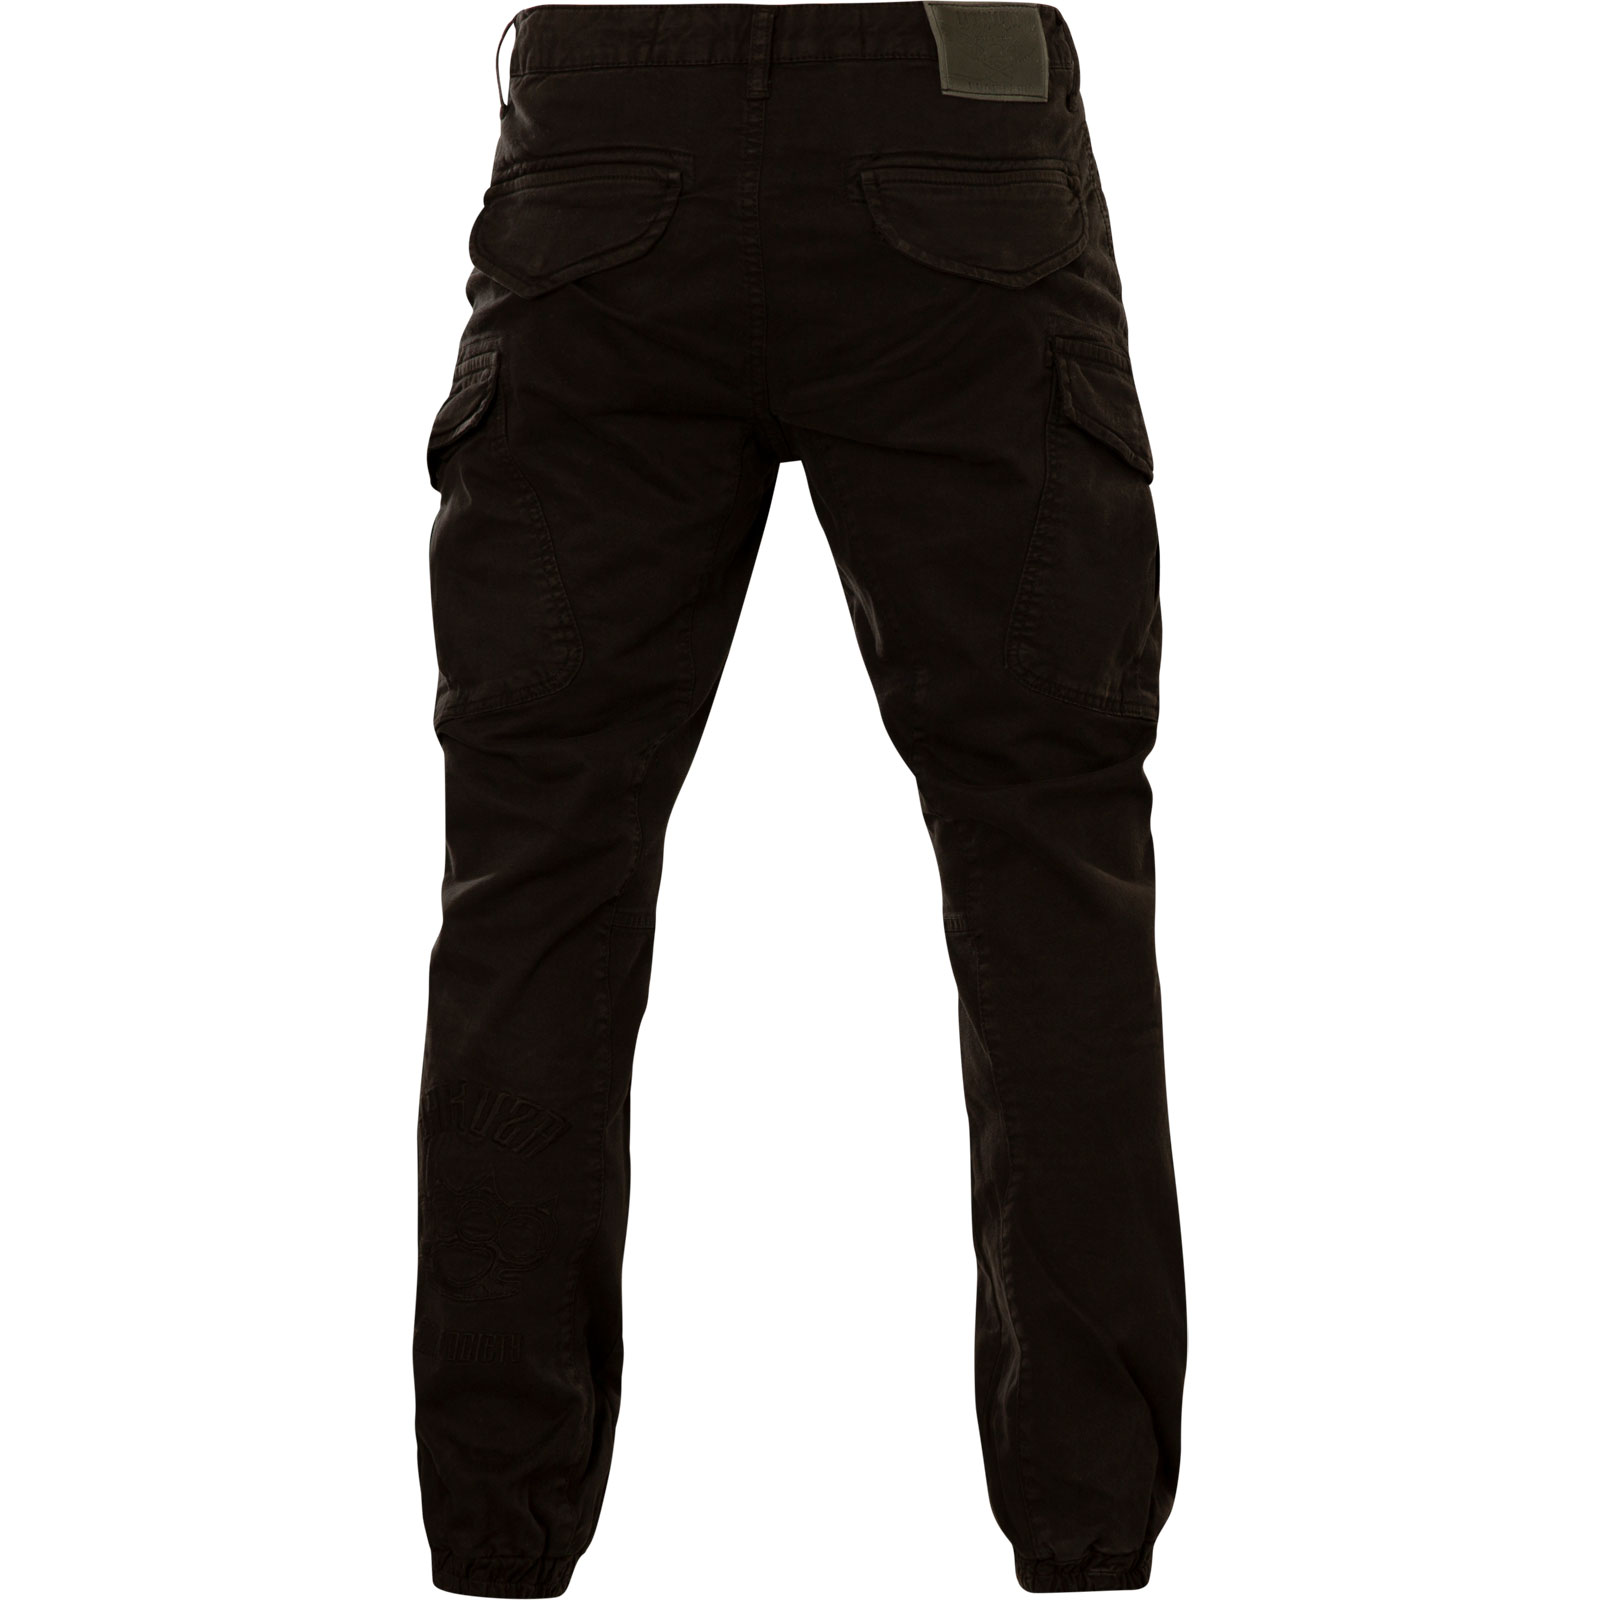 Yakuza Brass Knuckle Grip Cargo Pants CPB-21051 in black with logo embossed